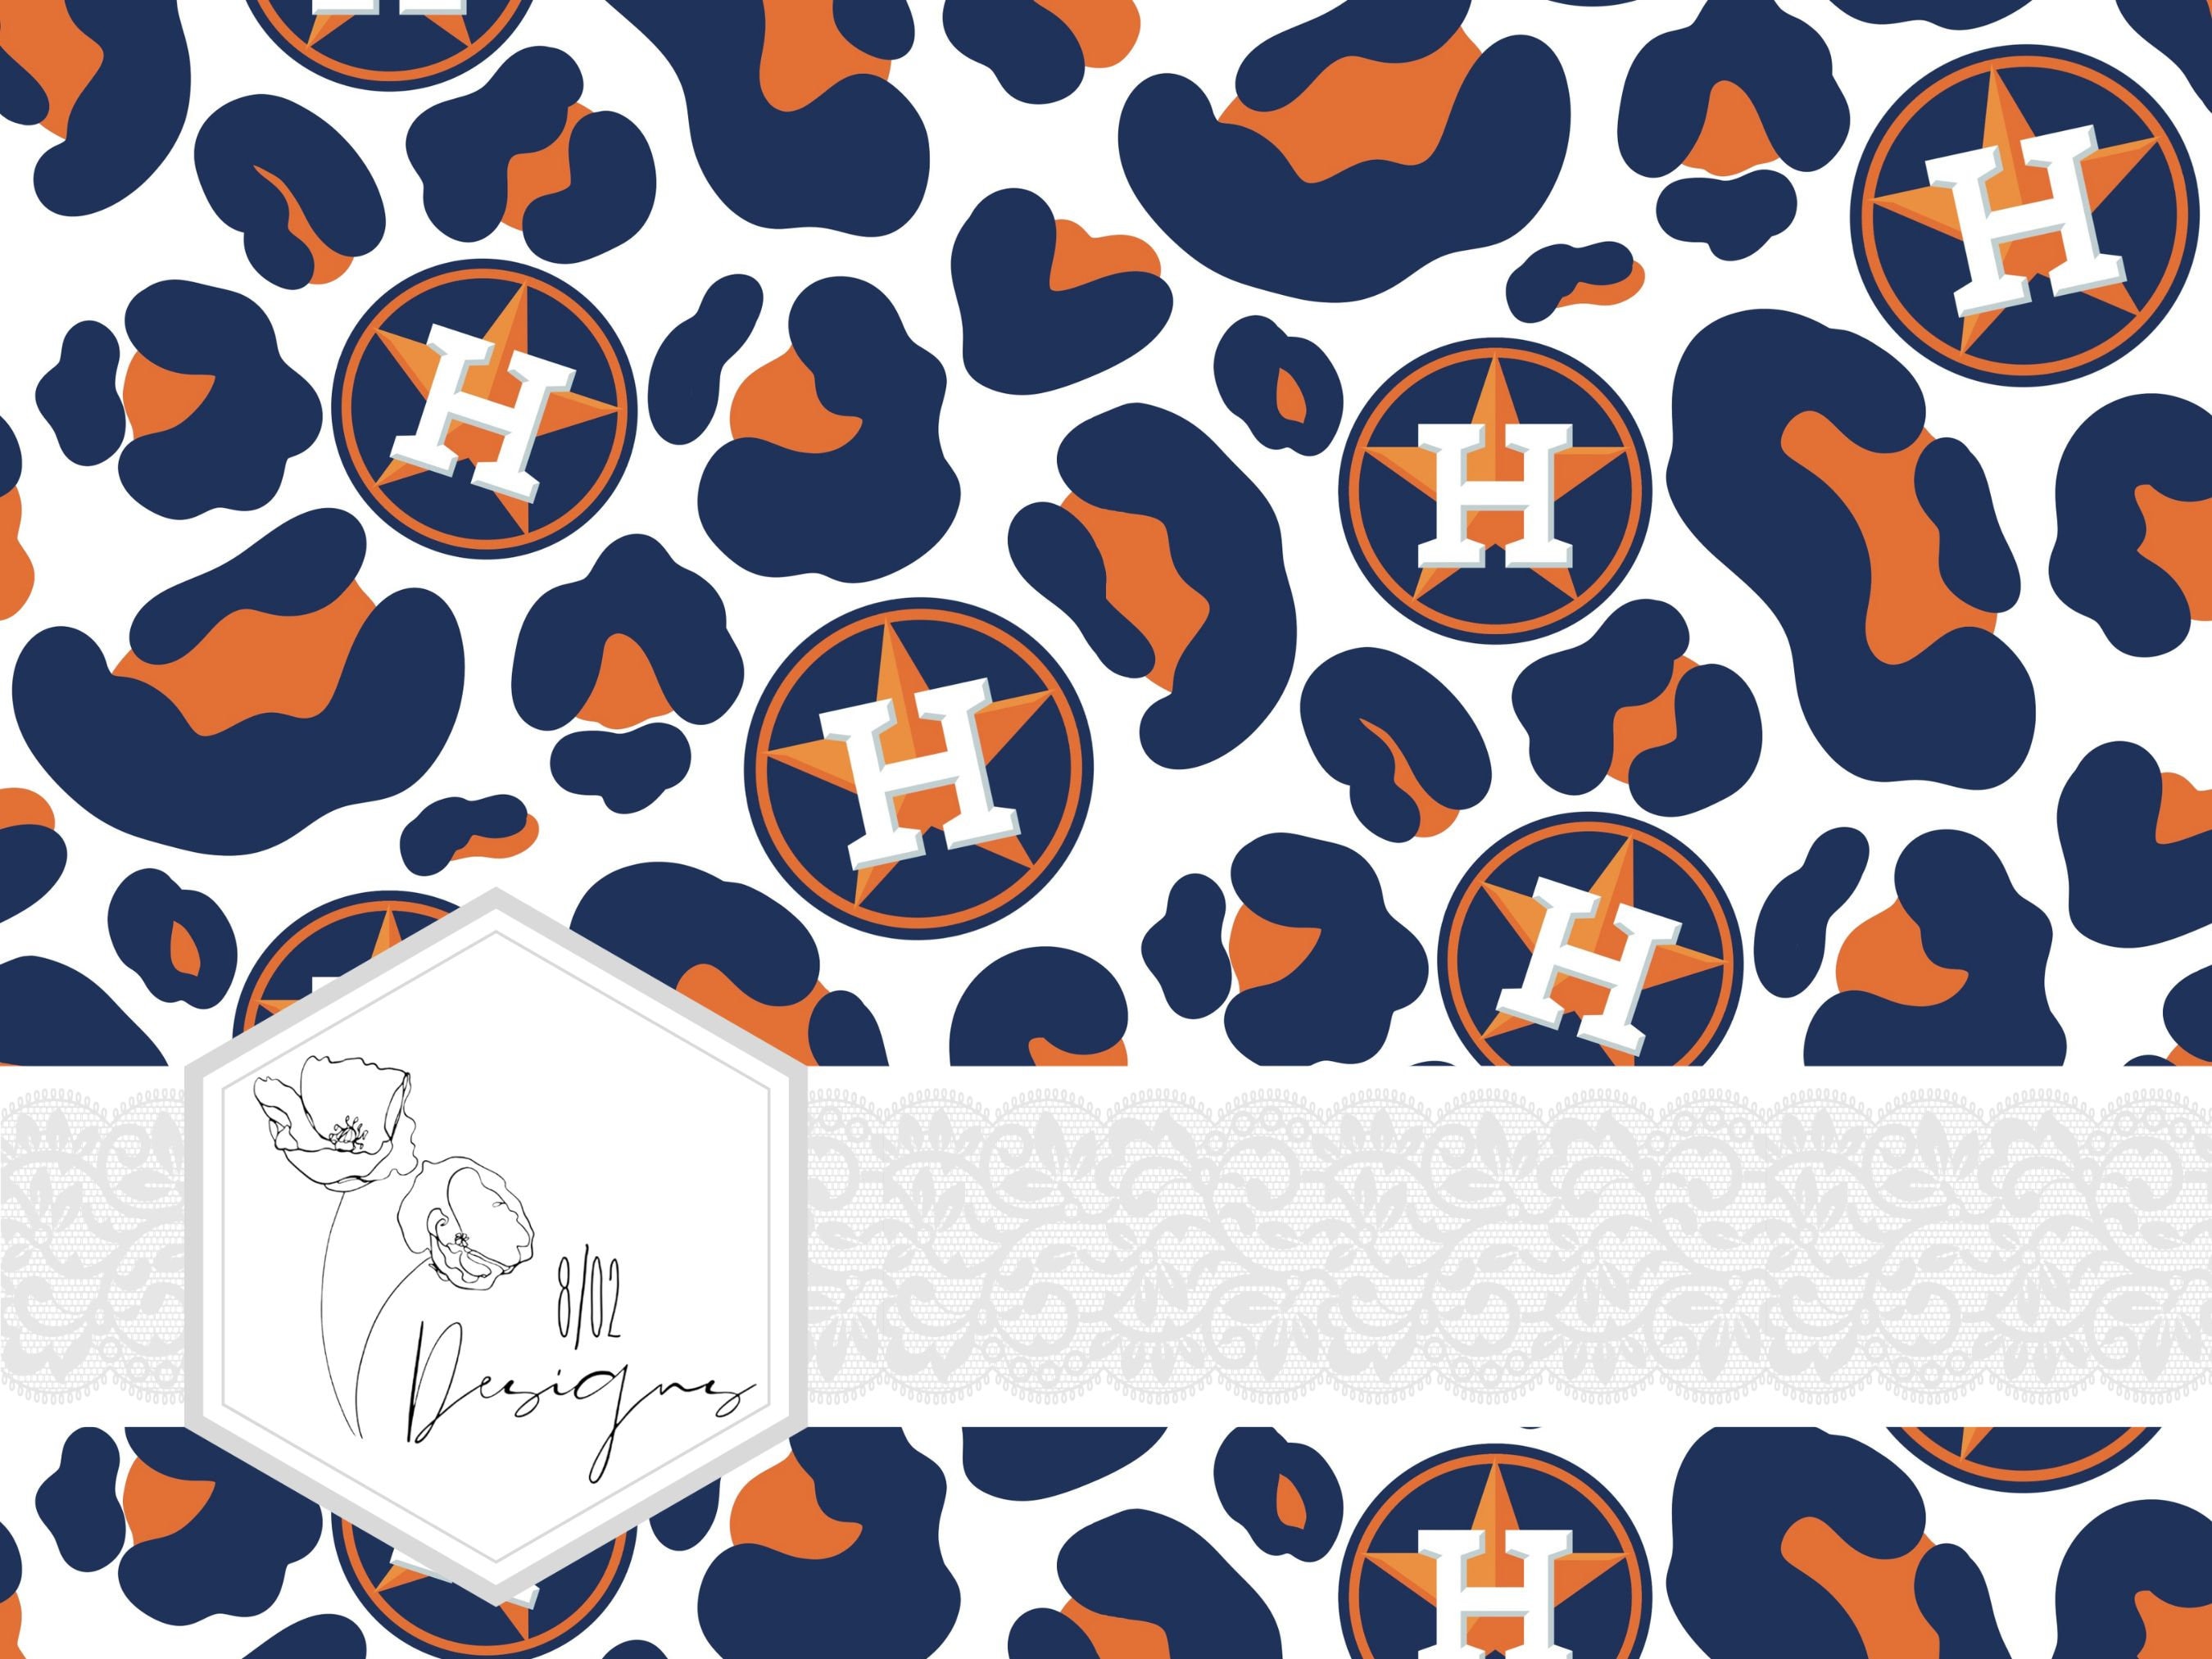 Houston Astros Shirt SvgSnoopy And Friend Astros Baseball Vector, Gift For  MLB Svg Diy Craft Svg File For Cricut, Housto